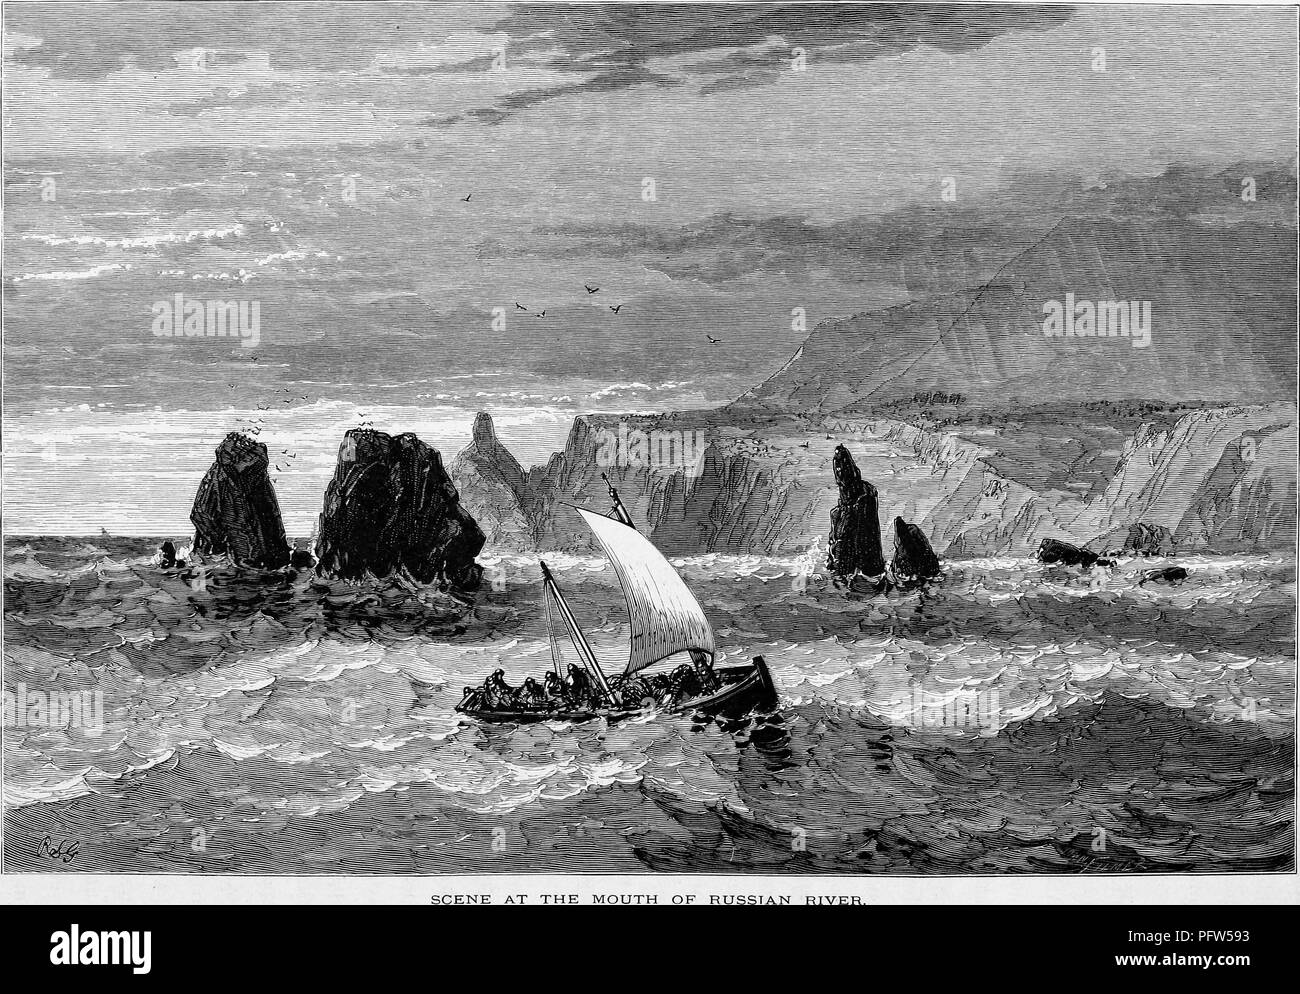 Black and a white vintage print depicting a small sailing vessel full of fishermen, in rough seas, with cliffs in the background, captioned 'Scene at the Mouth of Russian River, ' an outlet located approximately 60 miles north of the Golden Gate bridge in San Francisco, California, published in William Cullen Bryant's edited volume 'Picturesque America; or, The Land We Live In', 1872. Courtesy Internet Archive. () Stock Photo